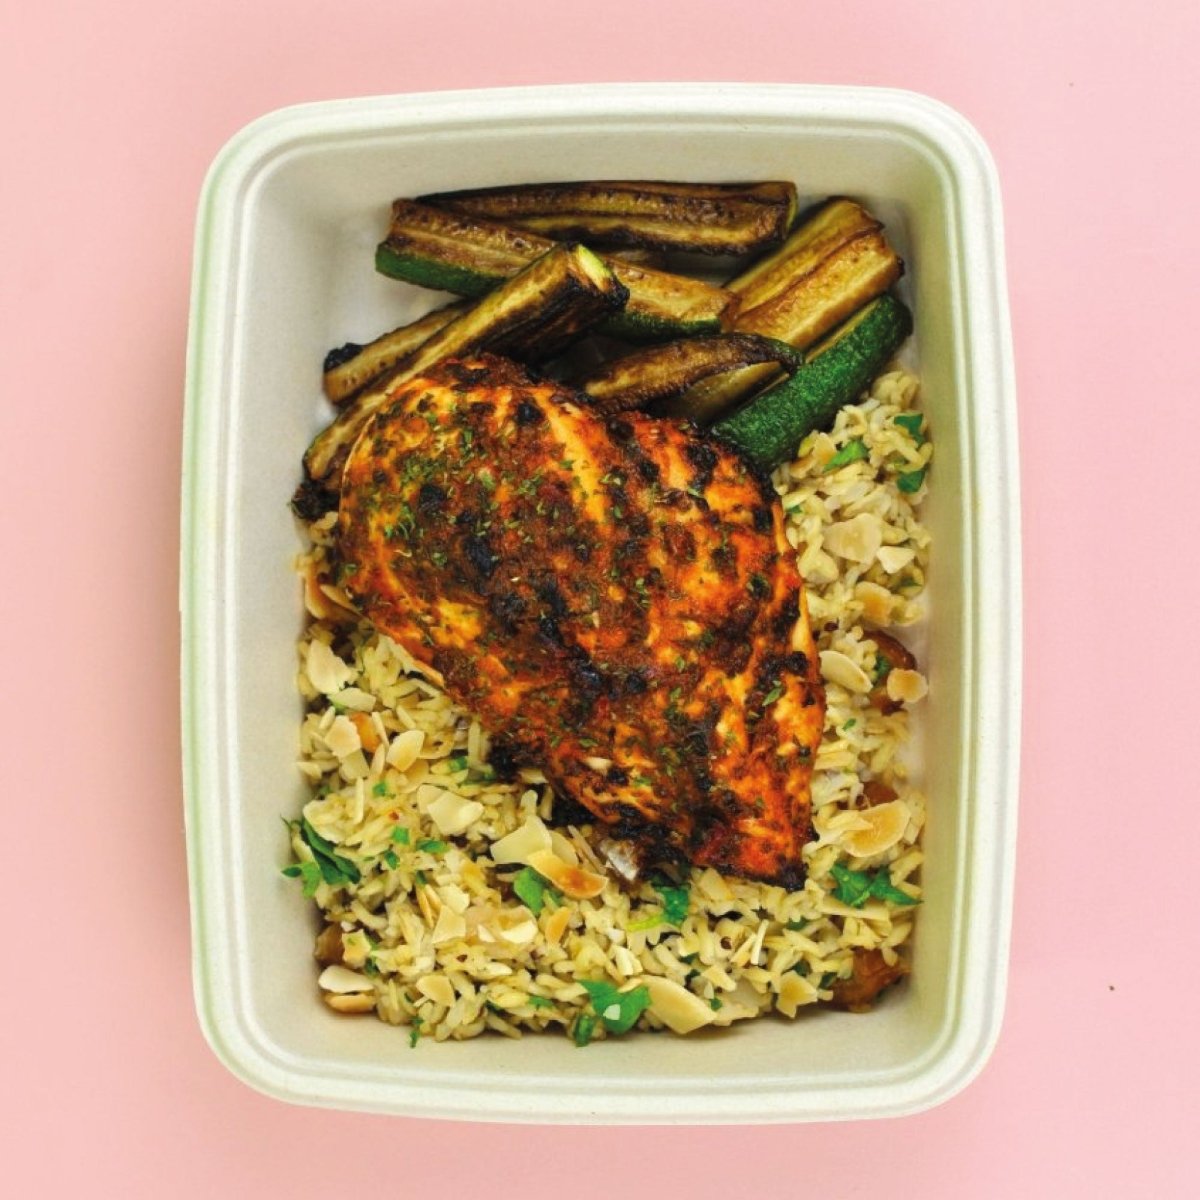 All Week Moroccan Roast Chicken Breast with Date & Almond Bulgur Wheat and Grilled Courgettes - All Week (formerly Out of the Box)